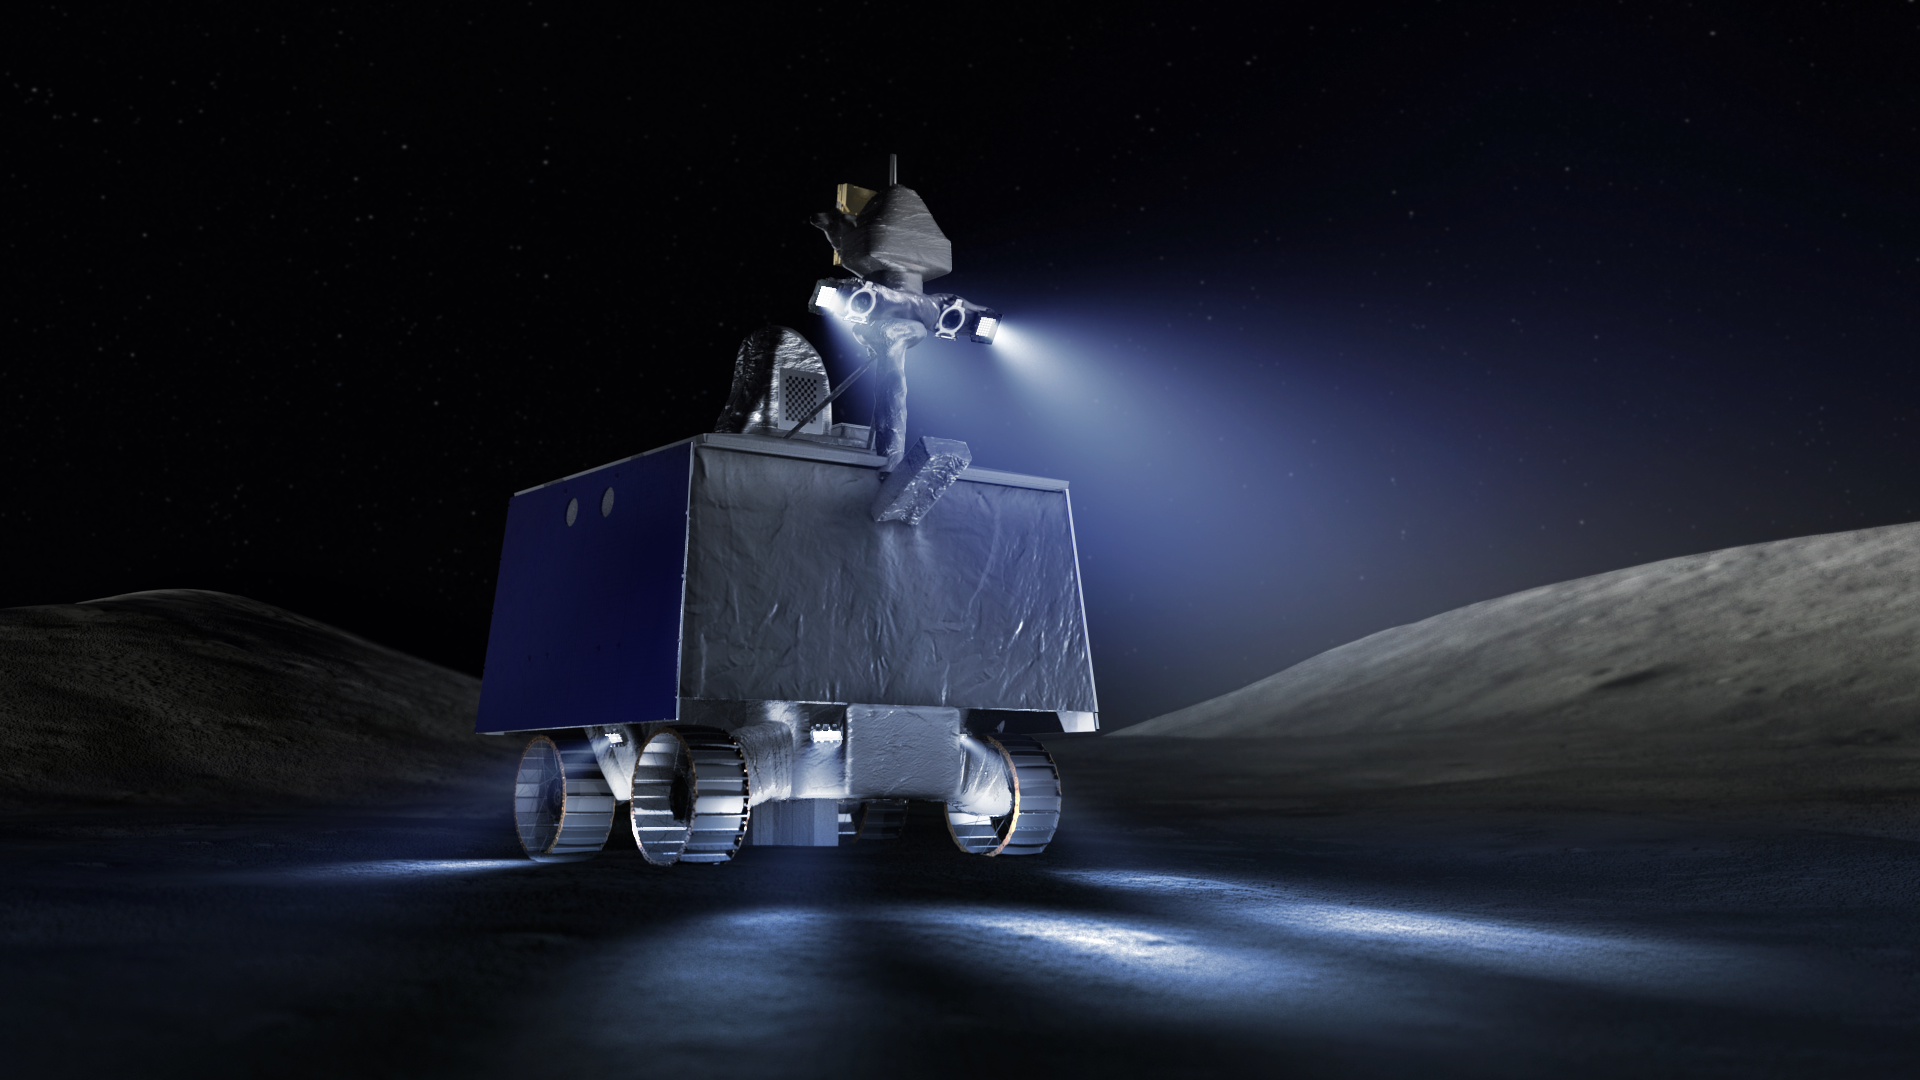 Artist's rendition of the VIPER rover on the surface of the moon